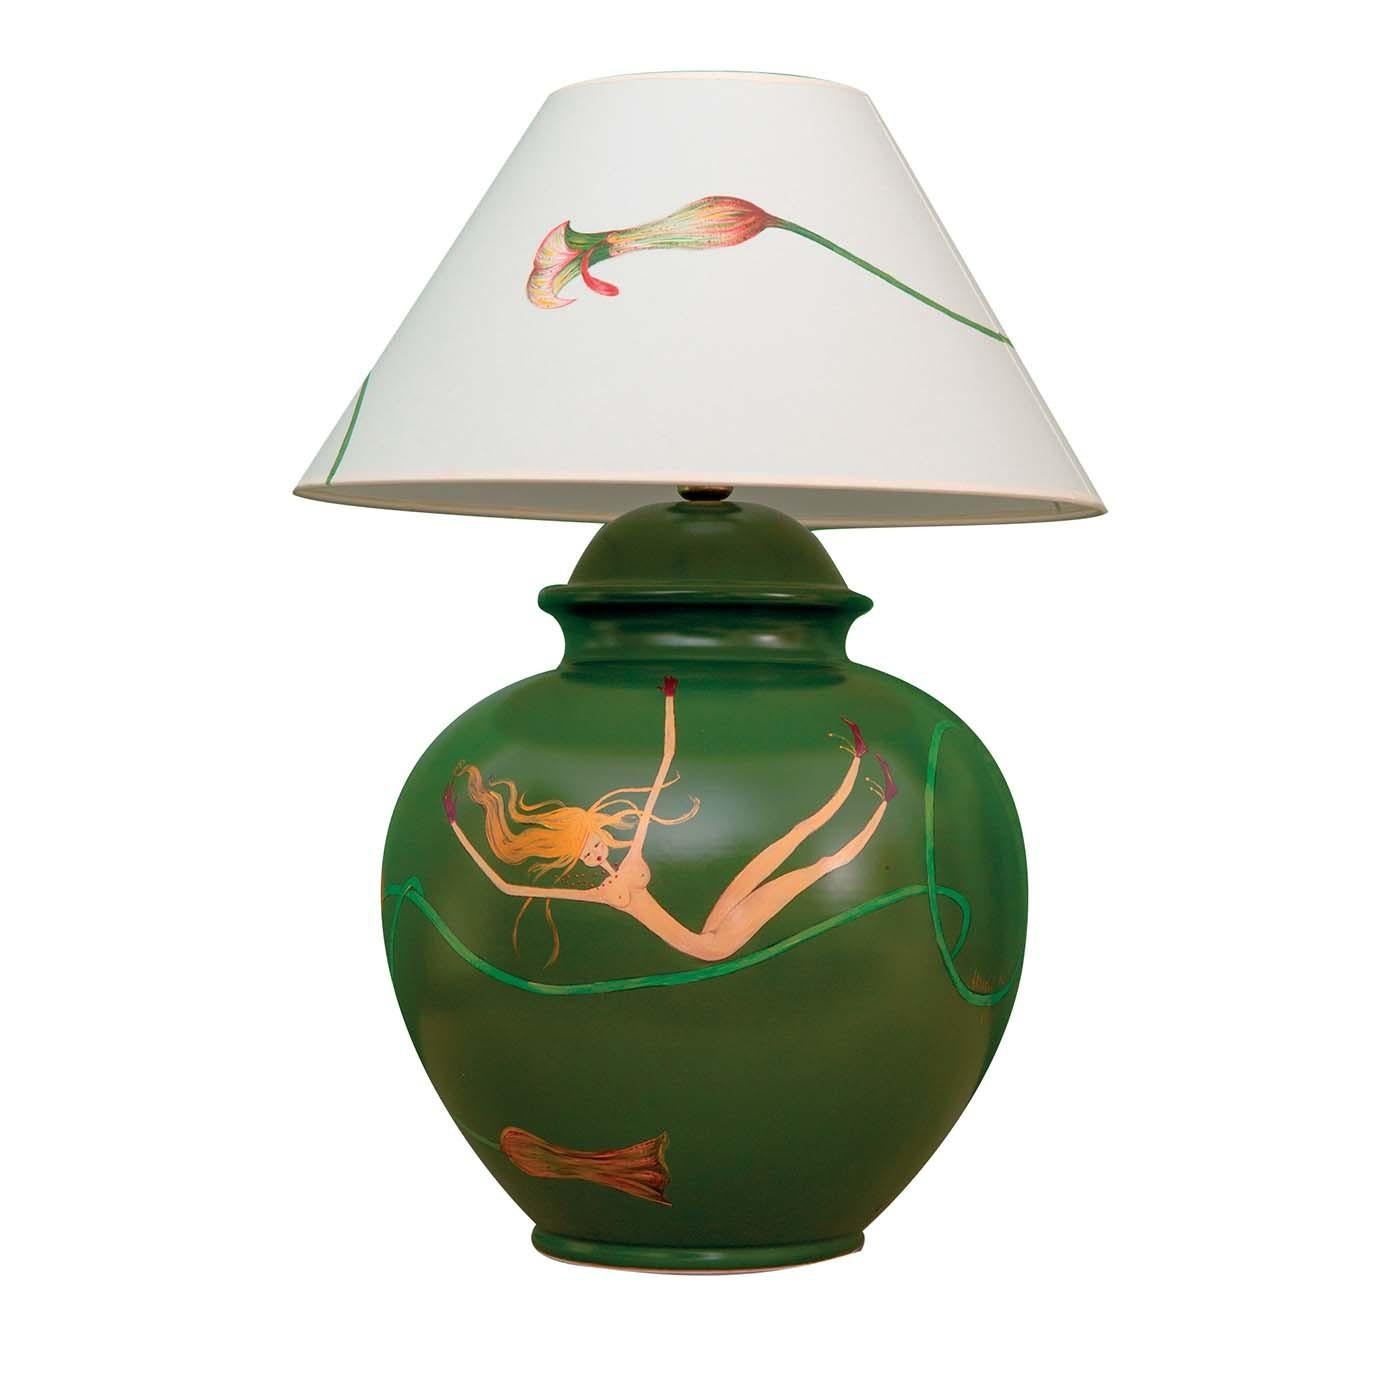 This magnificent piece is the result of masterful, traditional craftsmanship. A versatile and timeless table lamp, it is composed of a base fashioned of green-polished clay, and a white fabric lampshade decorated by hand with a delicate calla